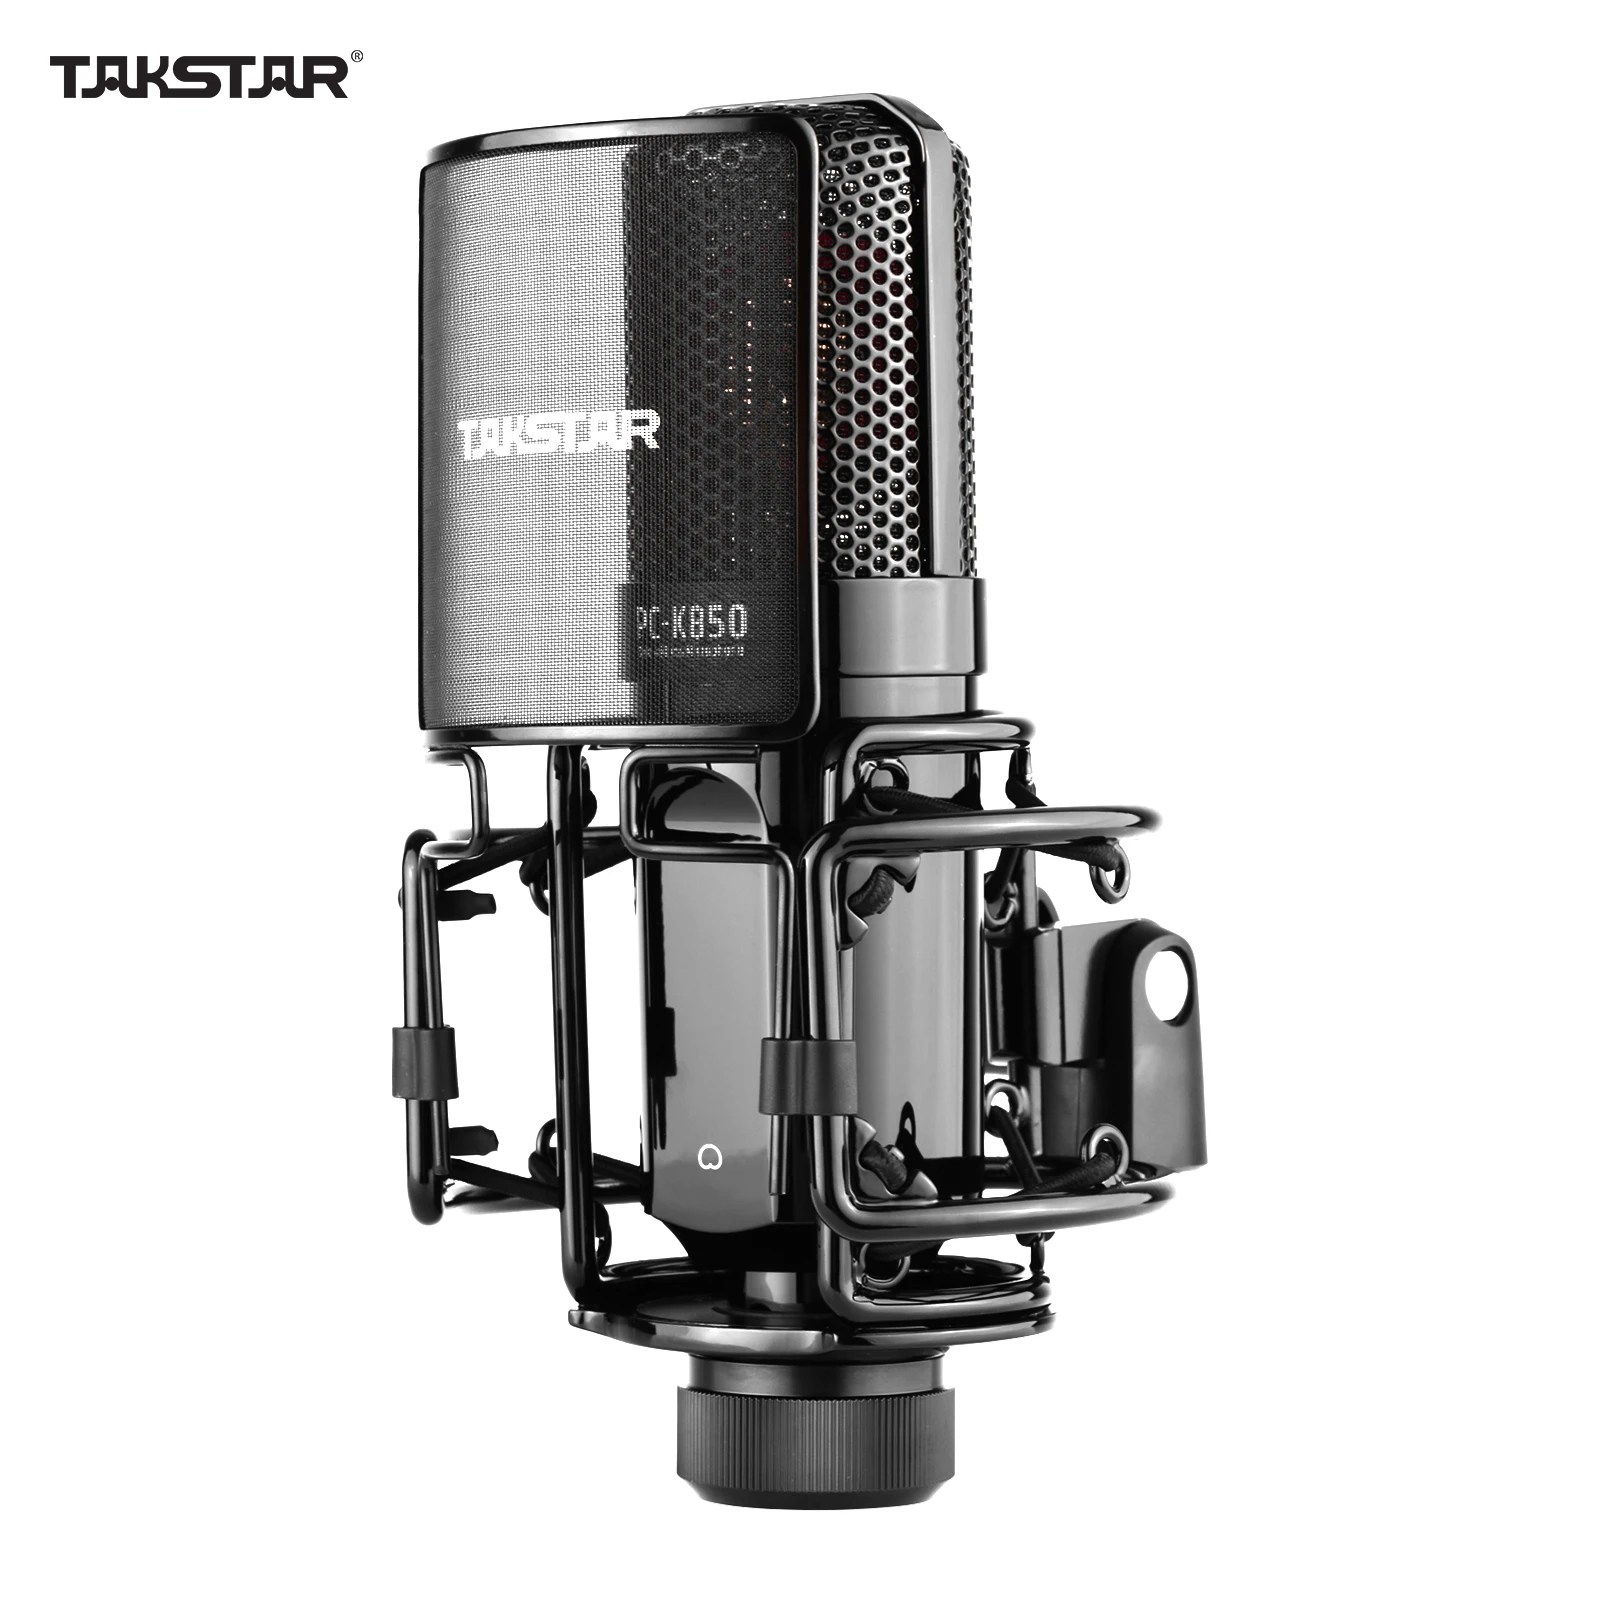 

TAKSTAR PC-K850 Side-Address Recording Microphone Cardioid Pickup Pattern Wired Condenser Mic for Live Streaming Karaoke Studio